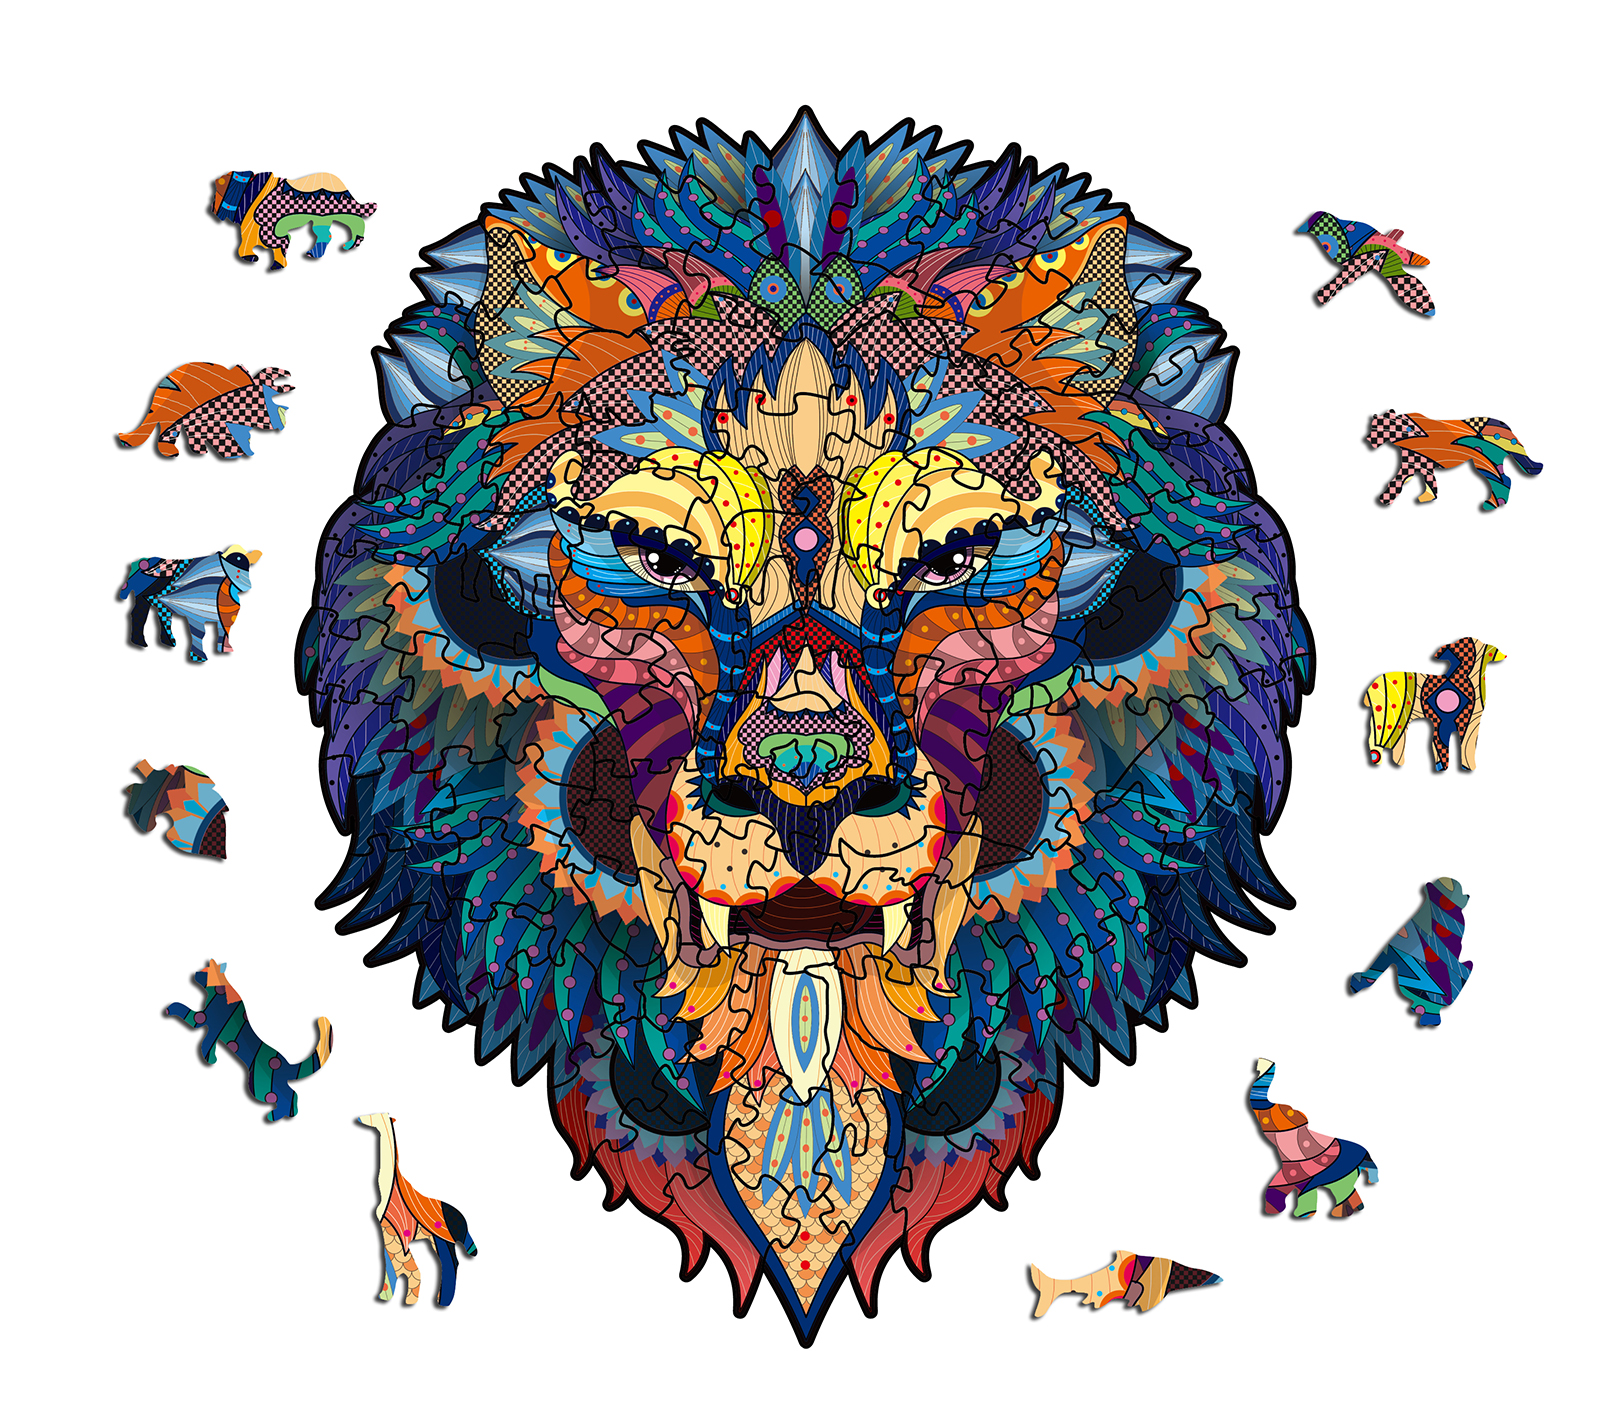 DIY Crafts Lion King Wooden Jigsaw Puzzle Gift for Adults and Kids Birthday gift Unique Shape Jigsaw Pieces Educational Toy, Learning Game, Souvenir - 200 pcs/set, 10x12" A4